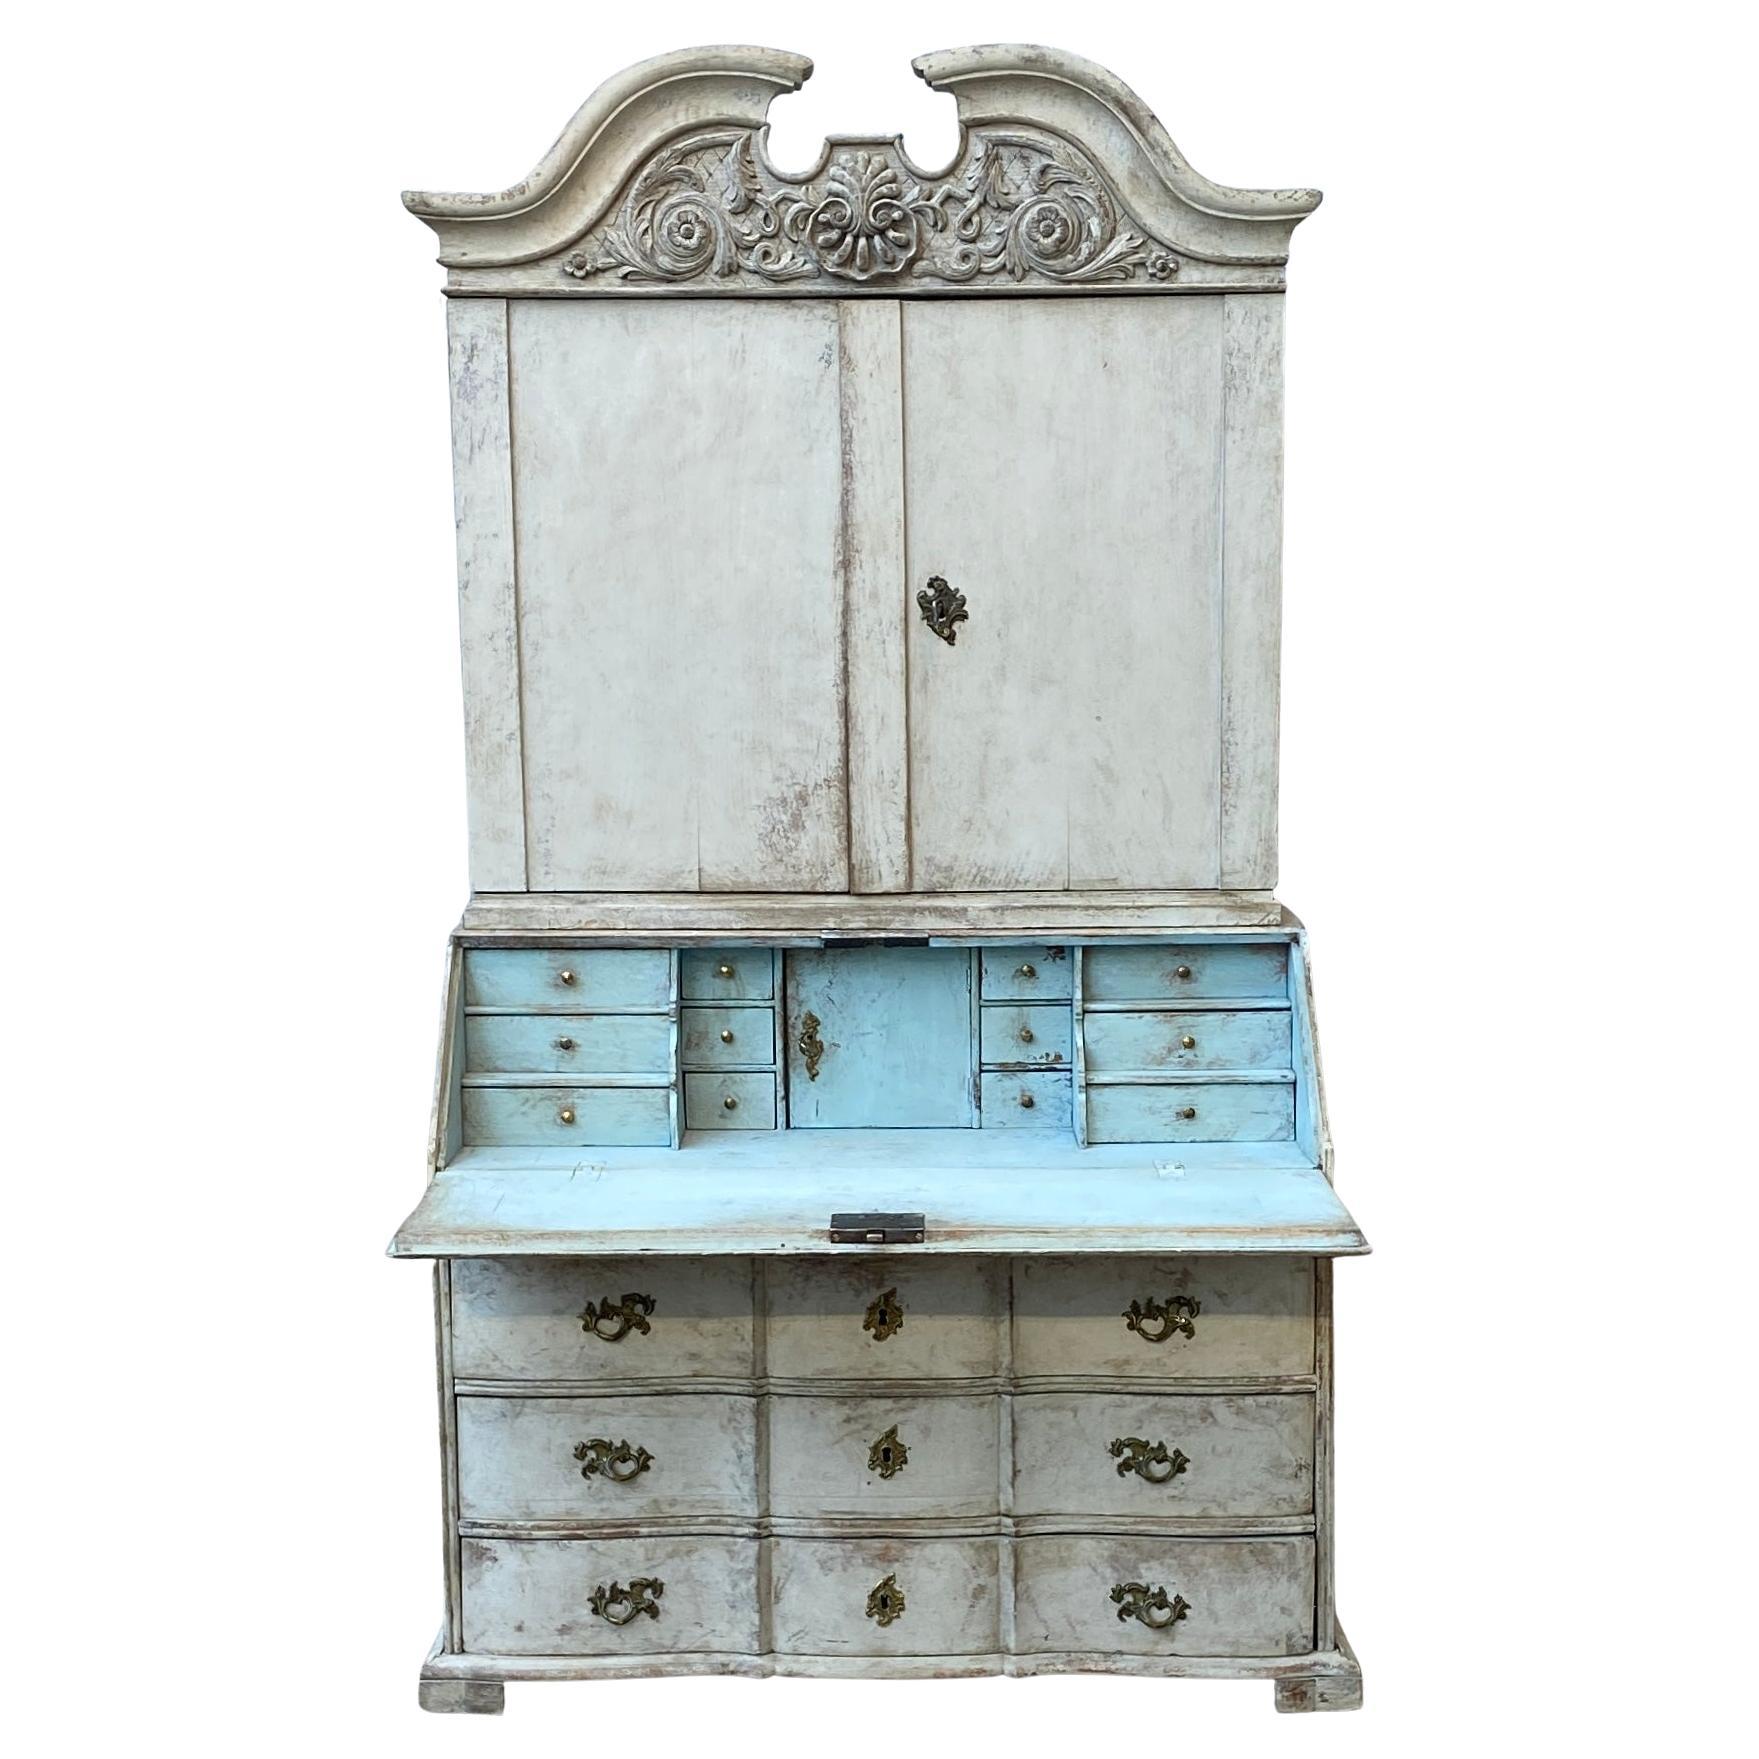 Swedish Rococo Secretary and Cabinet in hand painted Gustavian Style Gray and Light Blue Interior, circa 1760s.
The base of the cabinet has 3 plus 1 drawers with the original brass hardware. The top has two doors that when open shows 2 shelves.